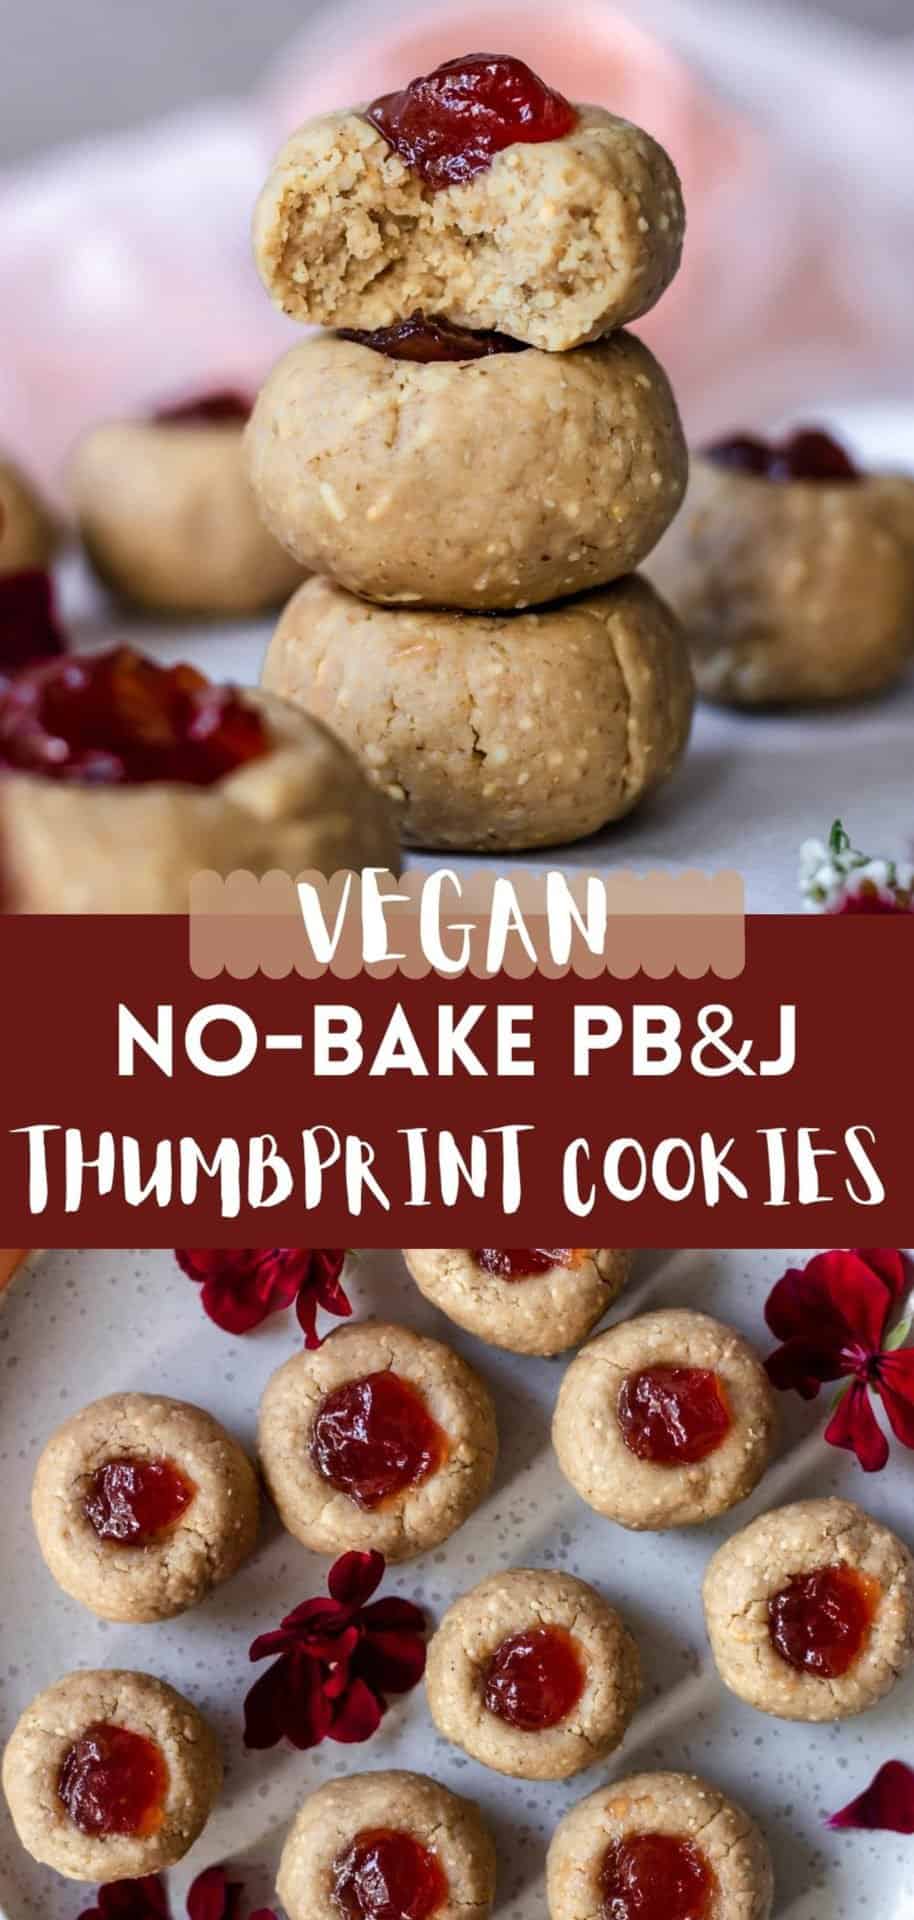 These No-Bake Peanut Butter and Jelly Thumbprint Cookies have that melt-in-your-mouth texture, they are easy to make and so very delicious!